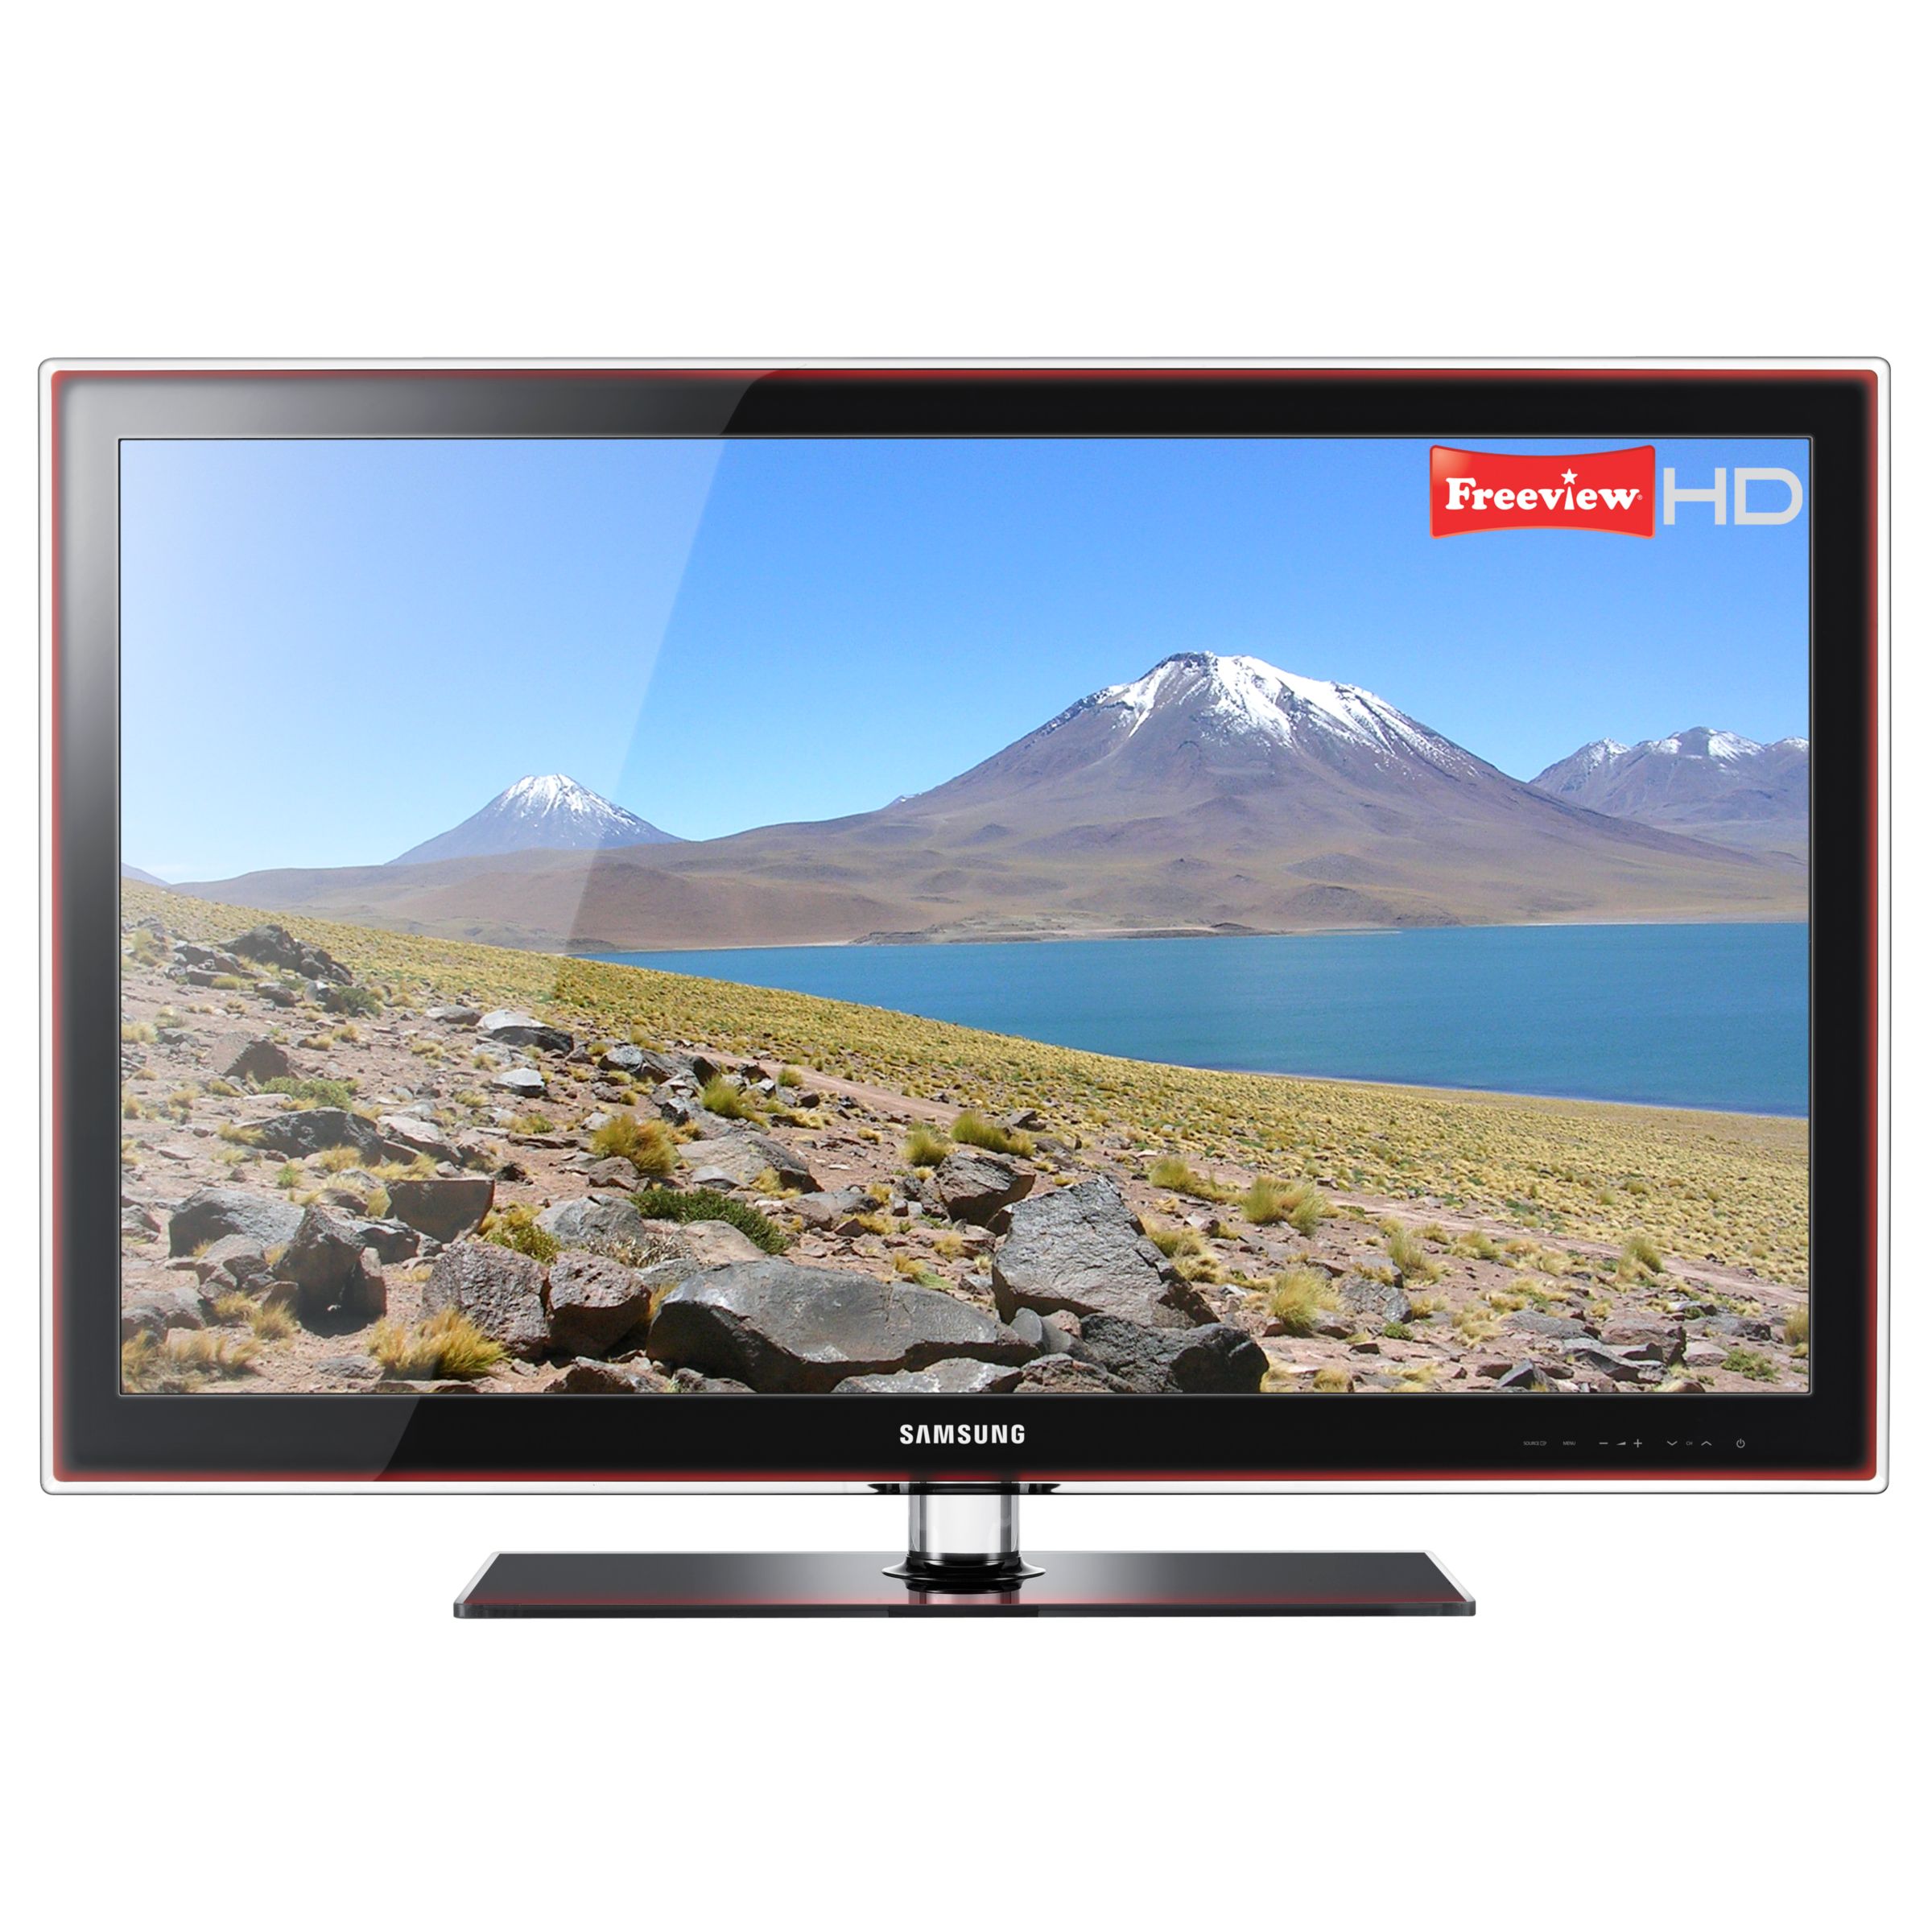 Samsung UE40C5800Q LED HD 1080p Digital Television, 40 Inch with Built-in Freeview HD at John Lewis